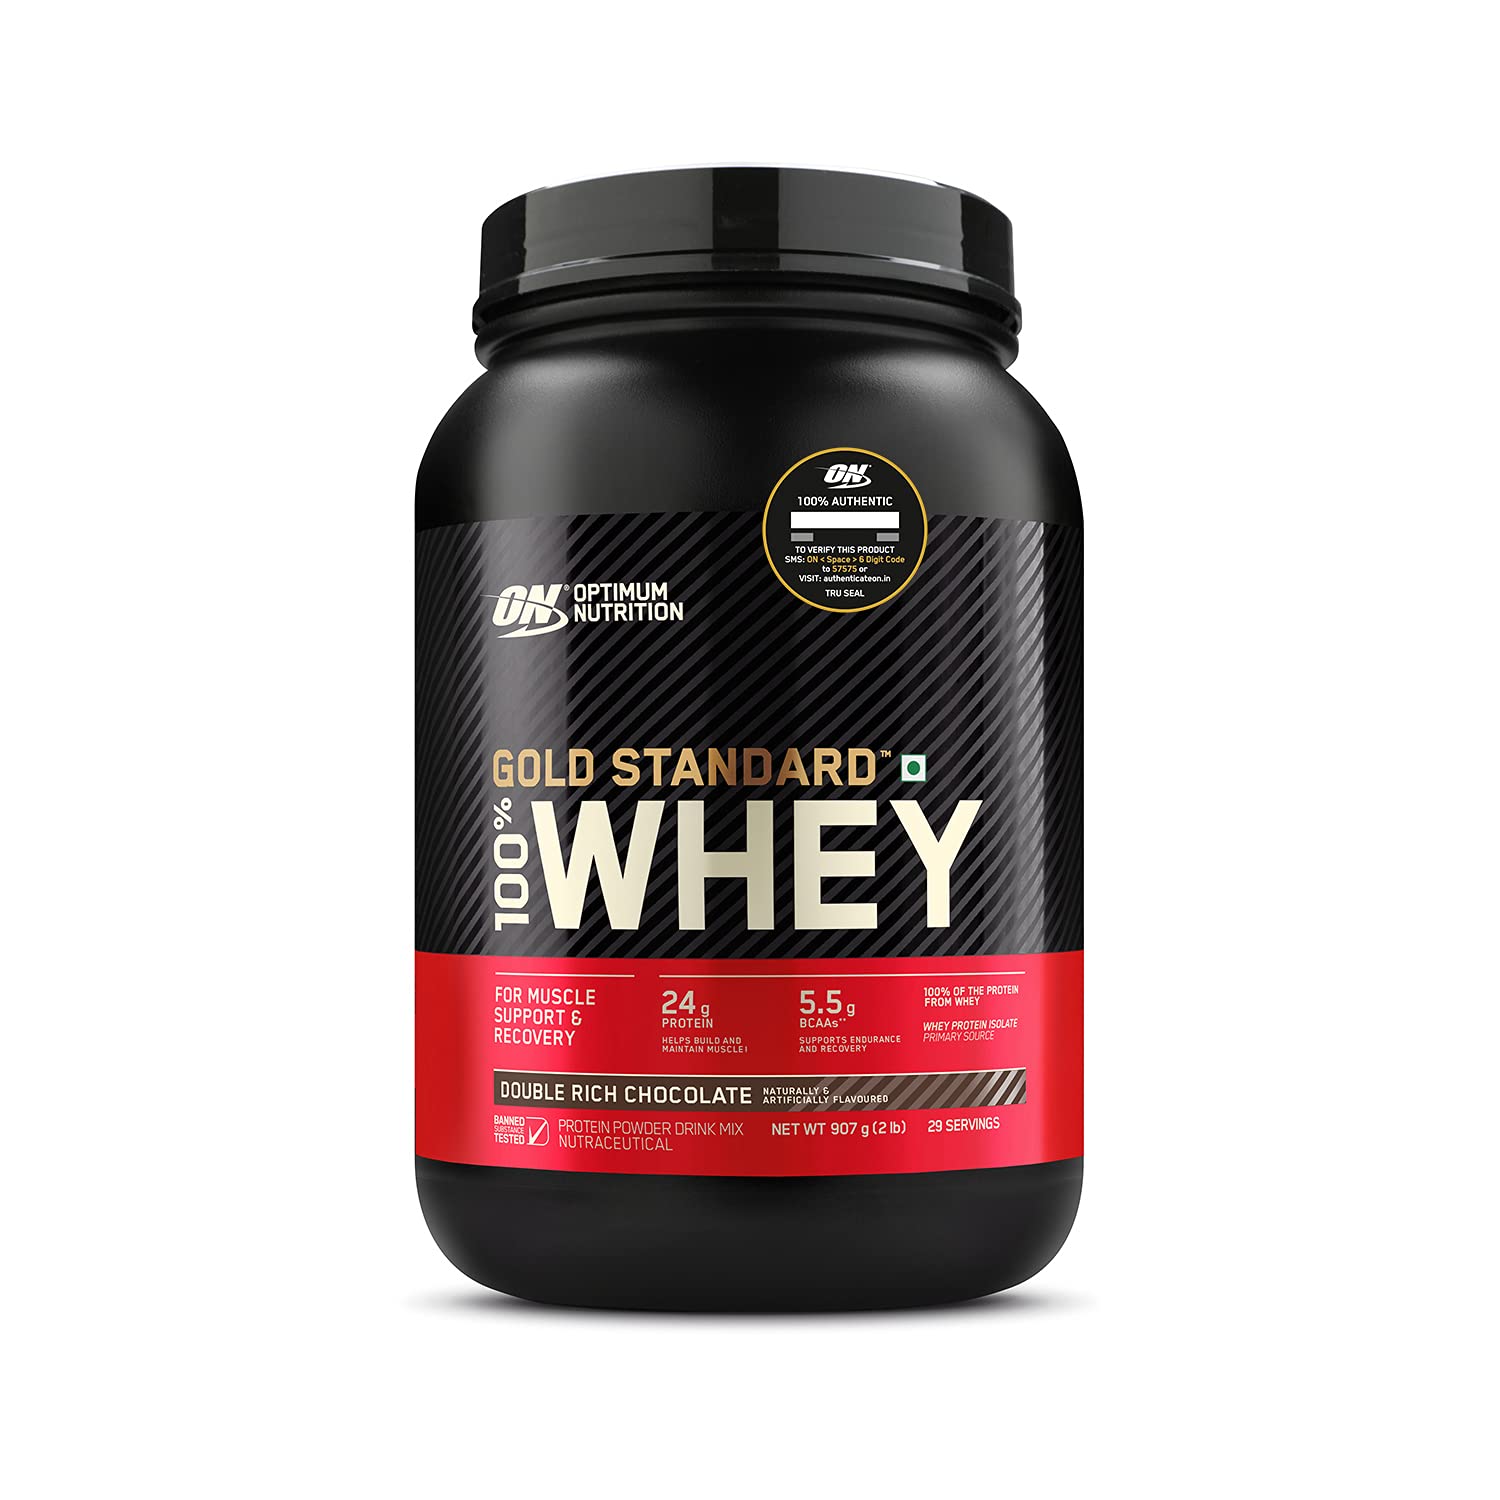 Optimum Nutrition ON Gold Standard 100% Whey Protein Primary Source Isolate - Double Rich Chocolate, 2 Lbs + ON Micronized Creatine Monohydrate Powder - Unflavored, 300 Grams